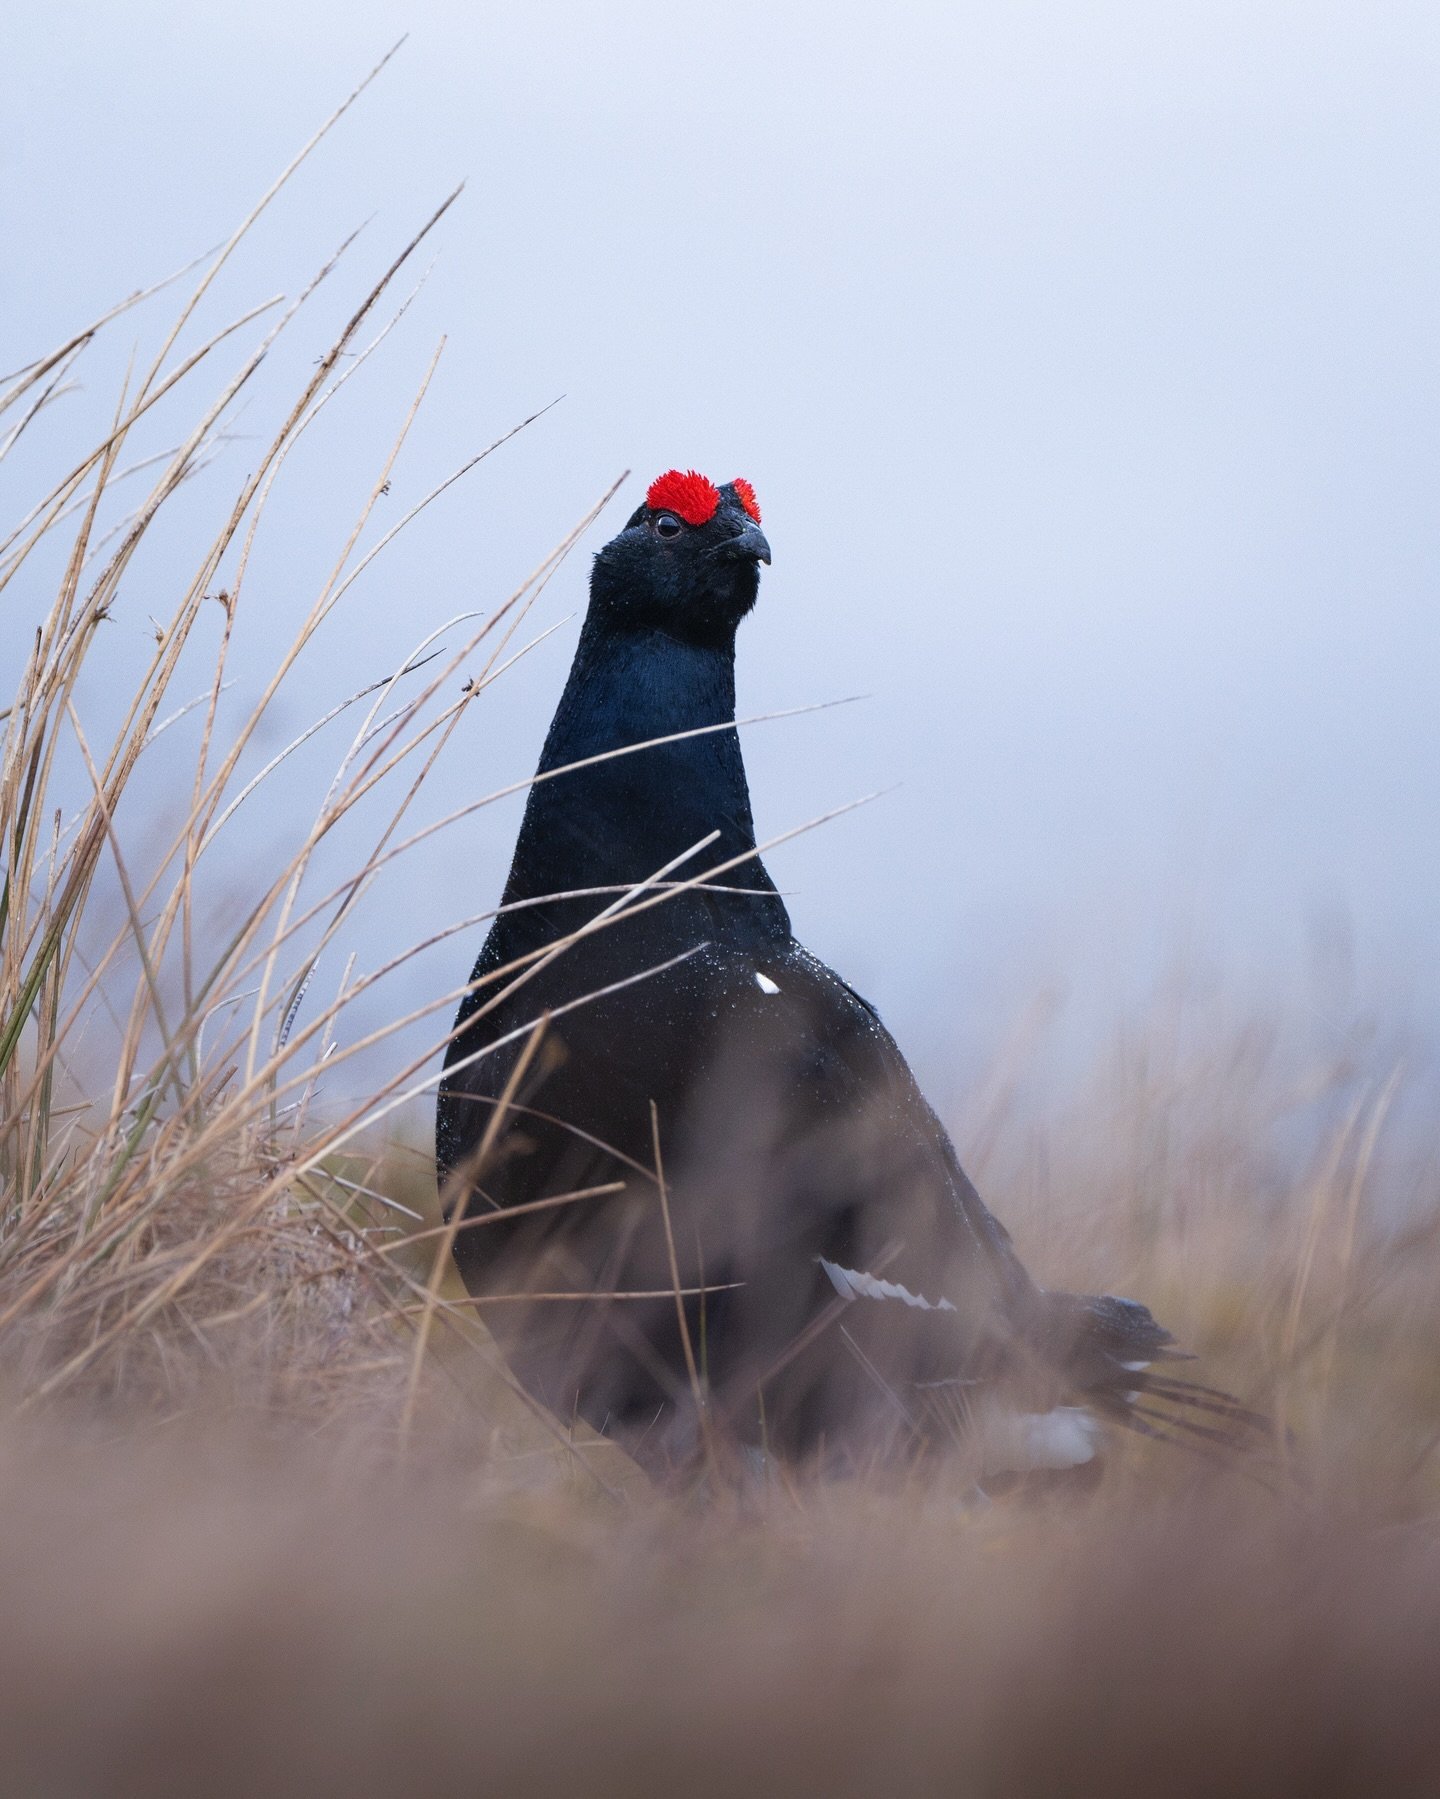 On the lookout. Every now and then all the birds at the lek would look up at potential threats and even once burst from the site and fly off for a few moments before returning shortly after to their ritual.

#blackgrouse #grouse #scotland #lek #black